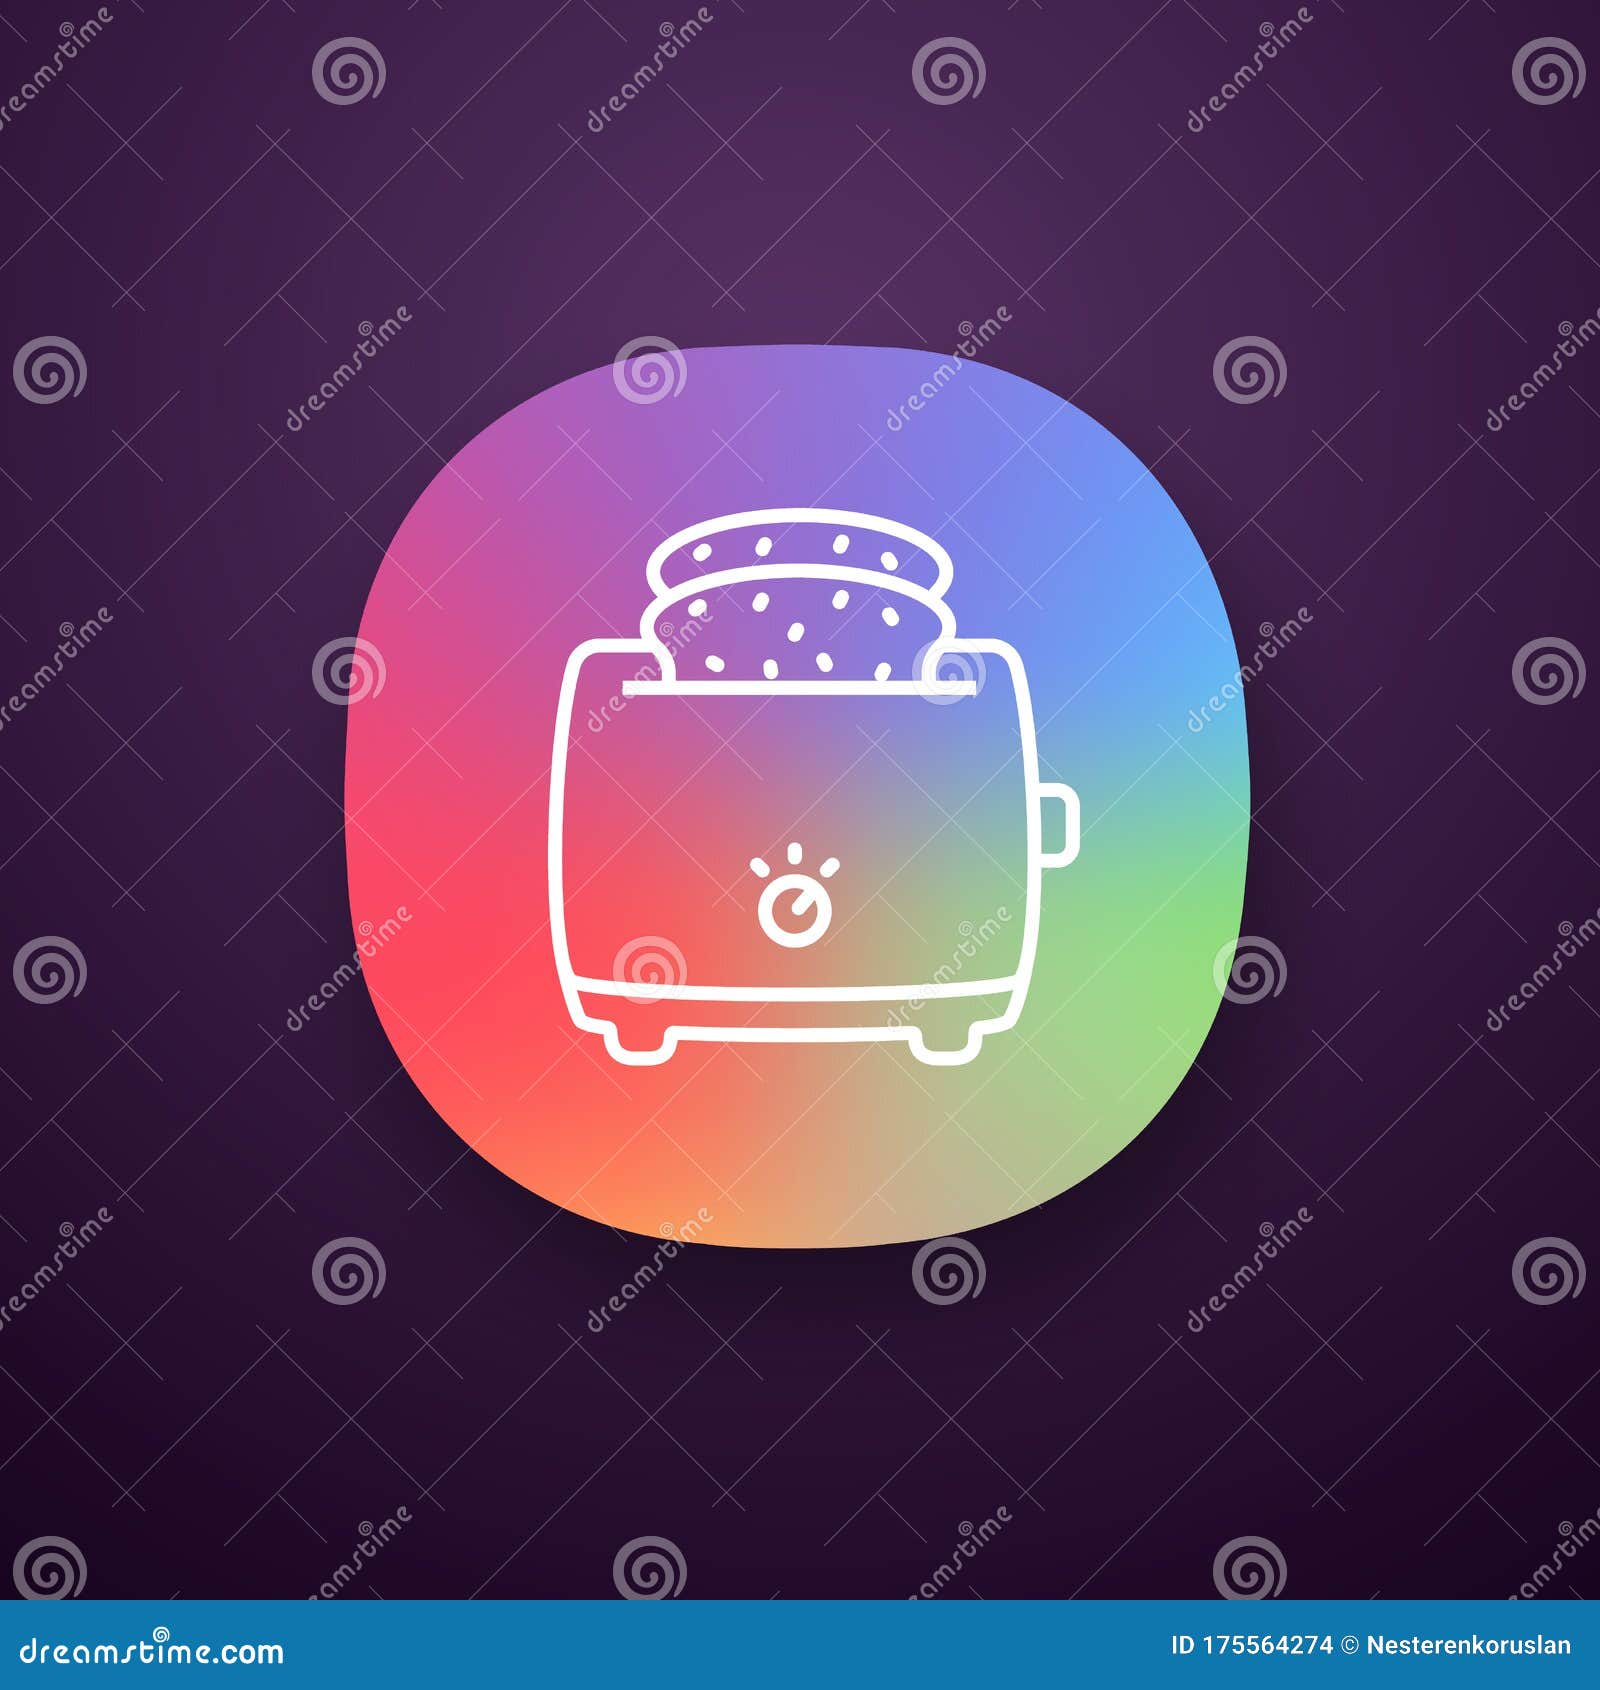 https://thumbs.dreamstime.com/z/slice-toaster-toast-app-icon-bread-kitchen-appliance-ui-ux-user-interface-web-mobile-application-vector-isolated-175564274.jpg